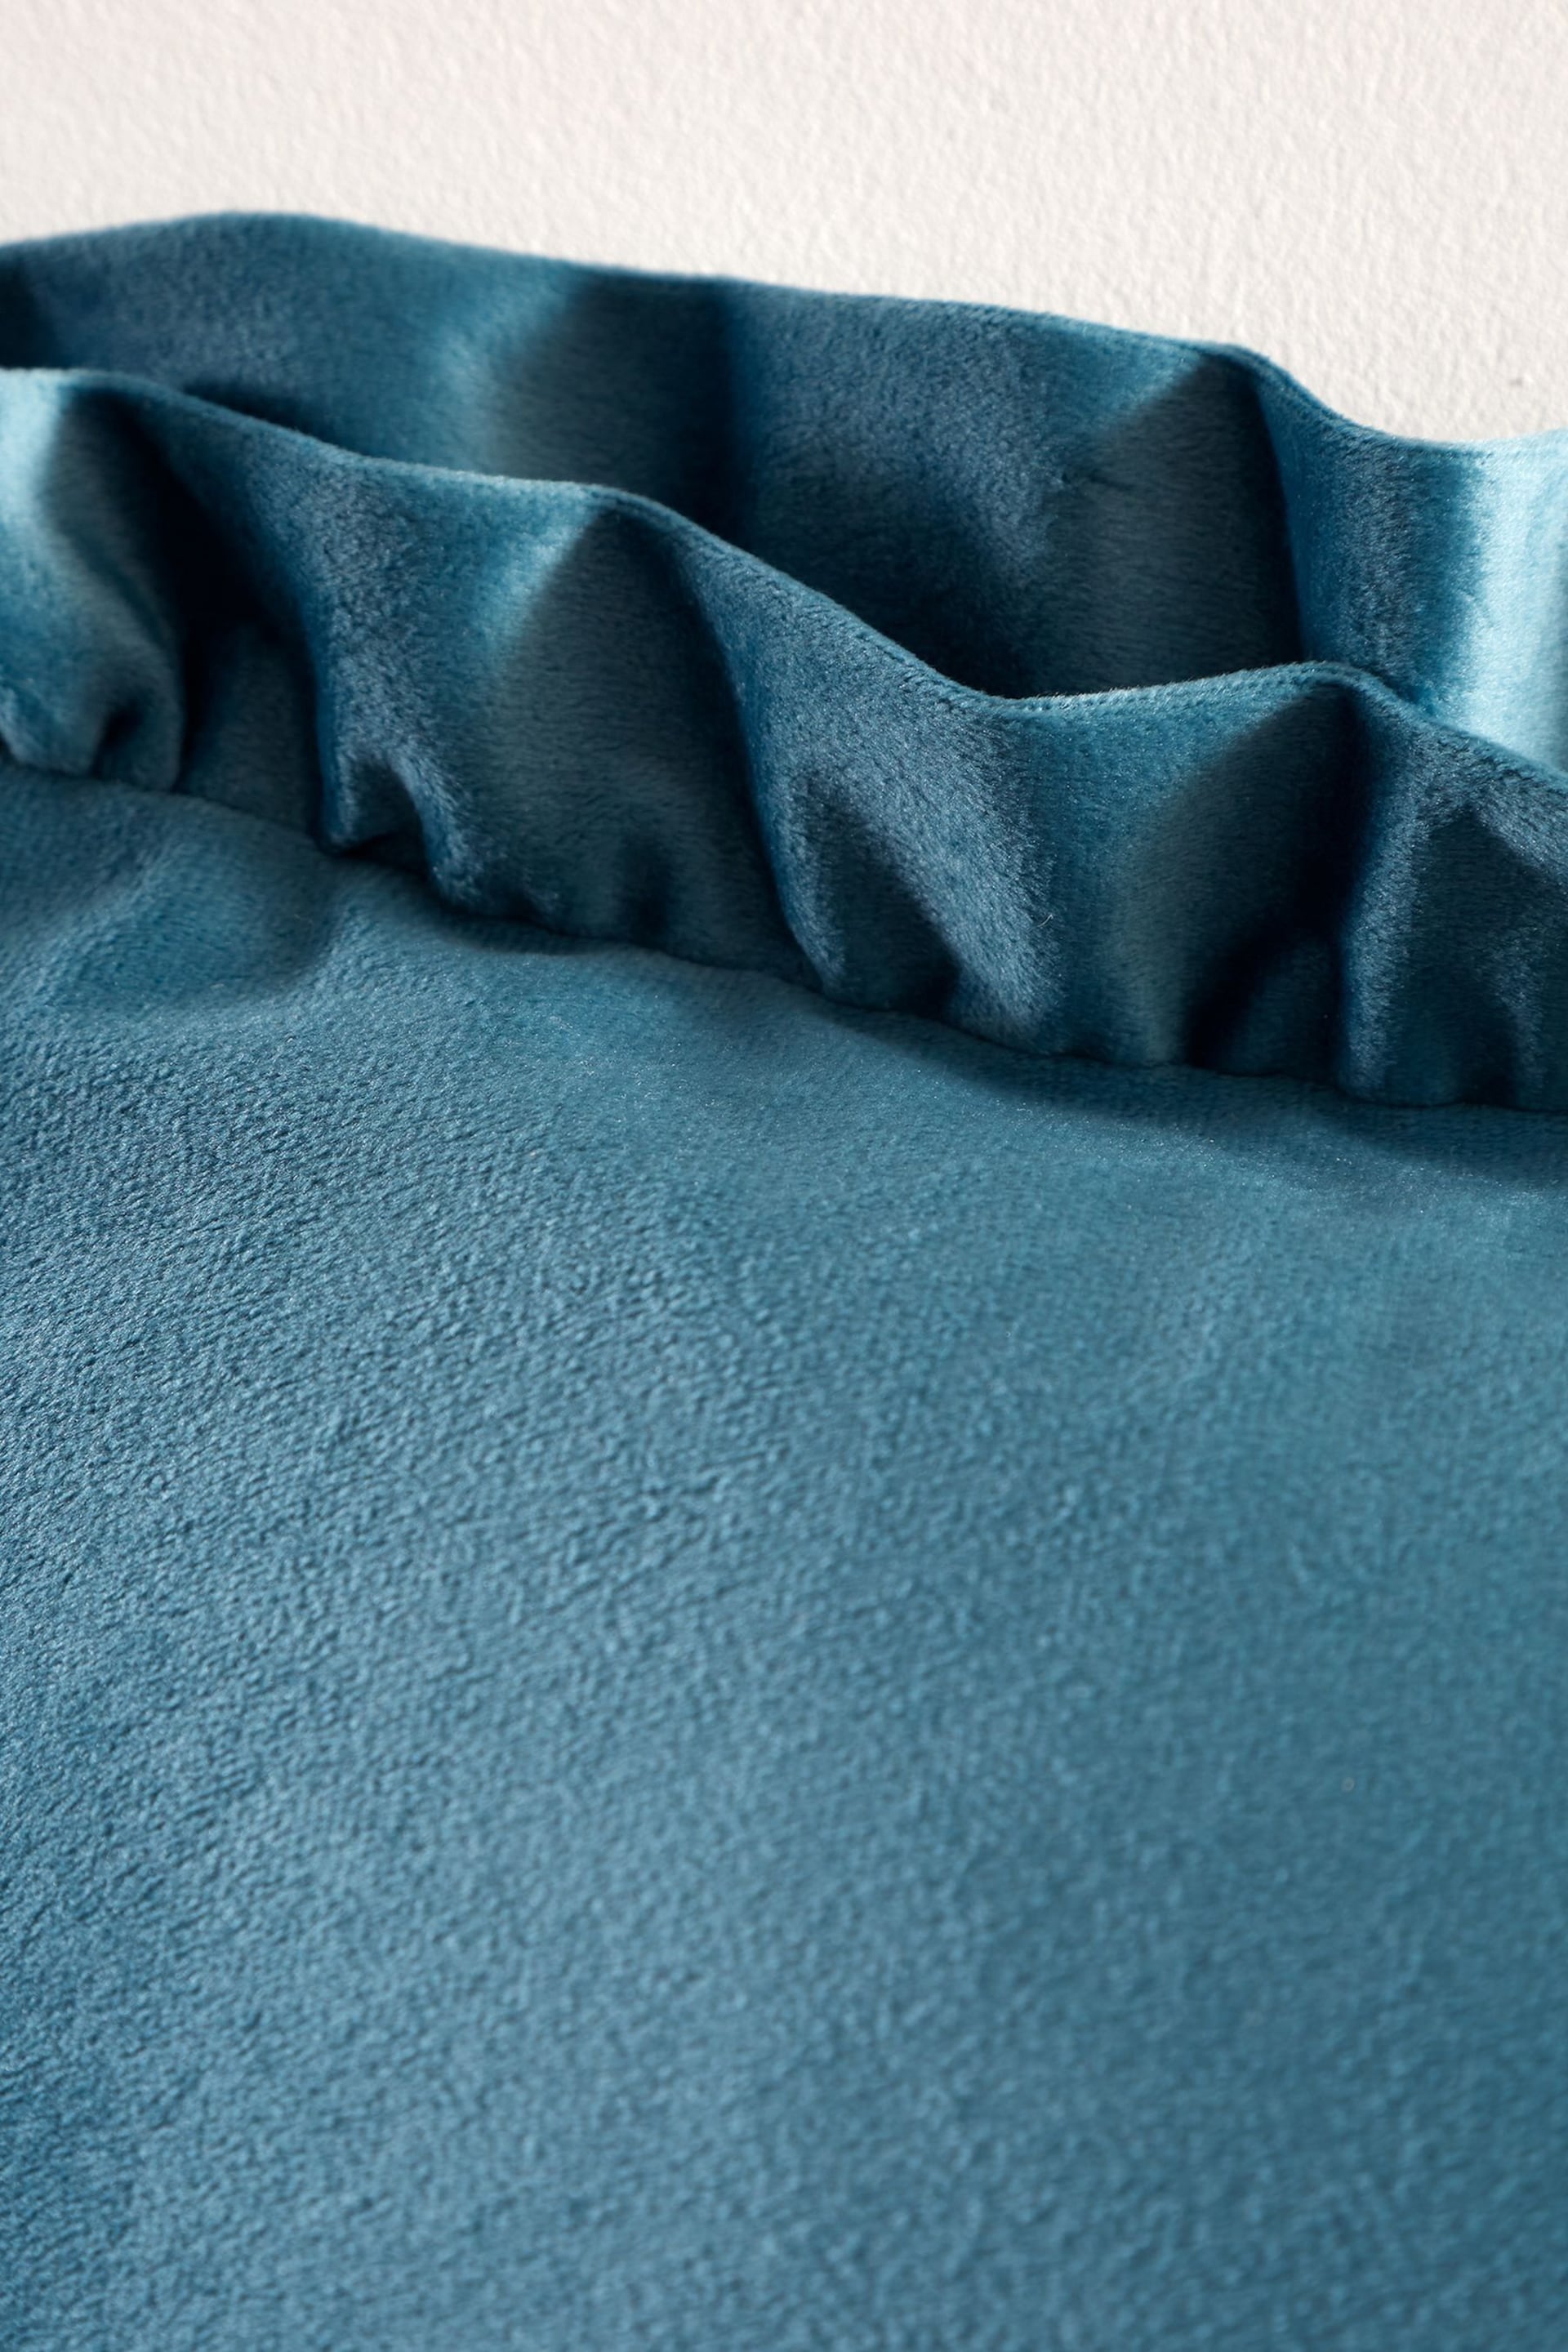 Catherine Lansfield Teal So Soft Velvet Double Frill Cushion - Image 3 of 5